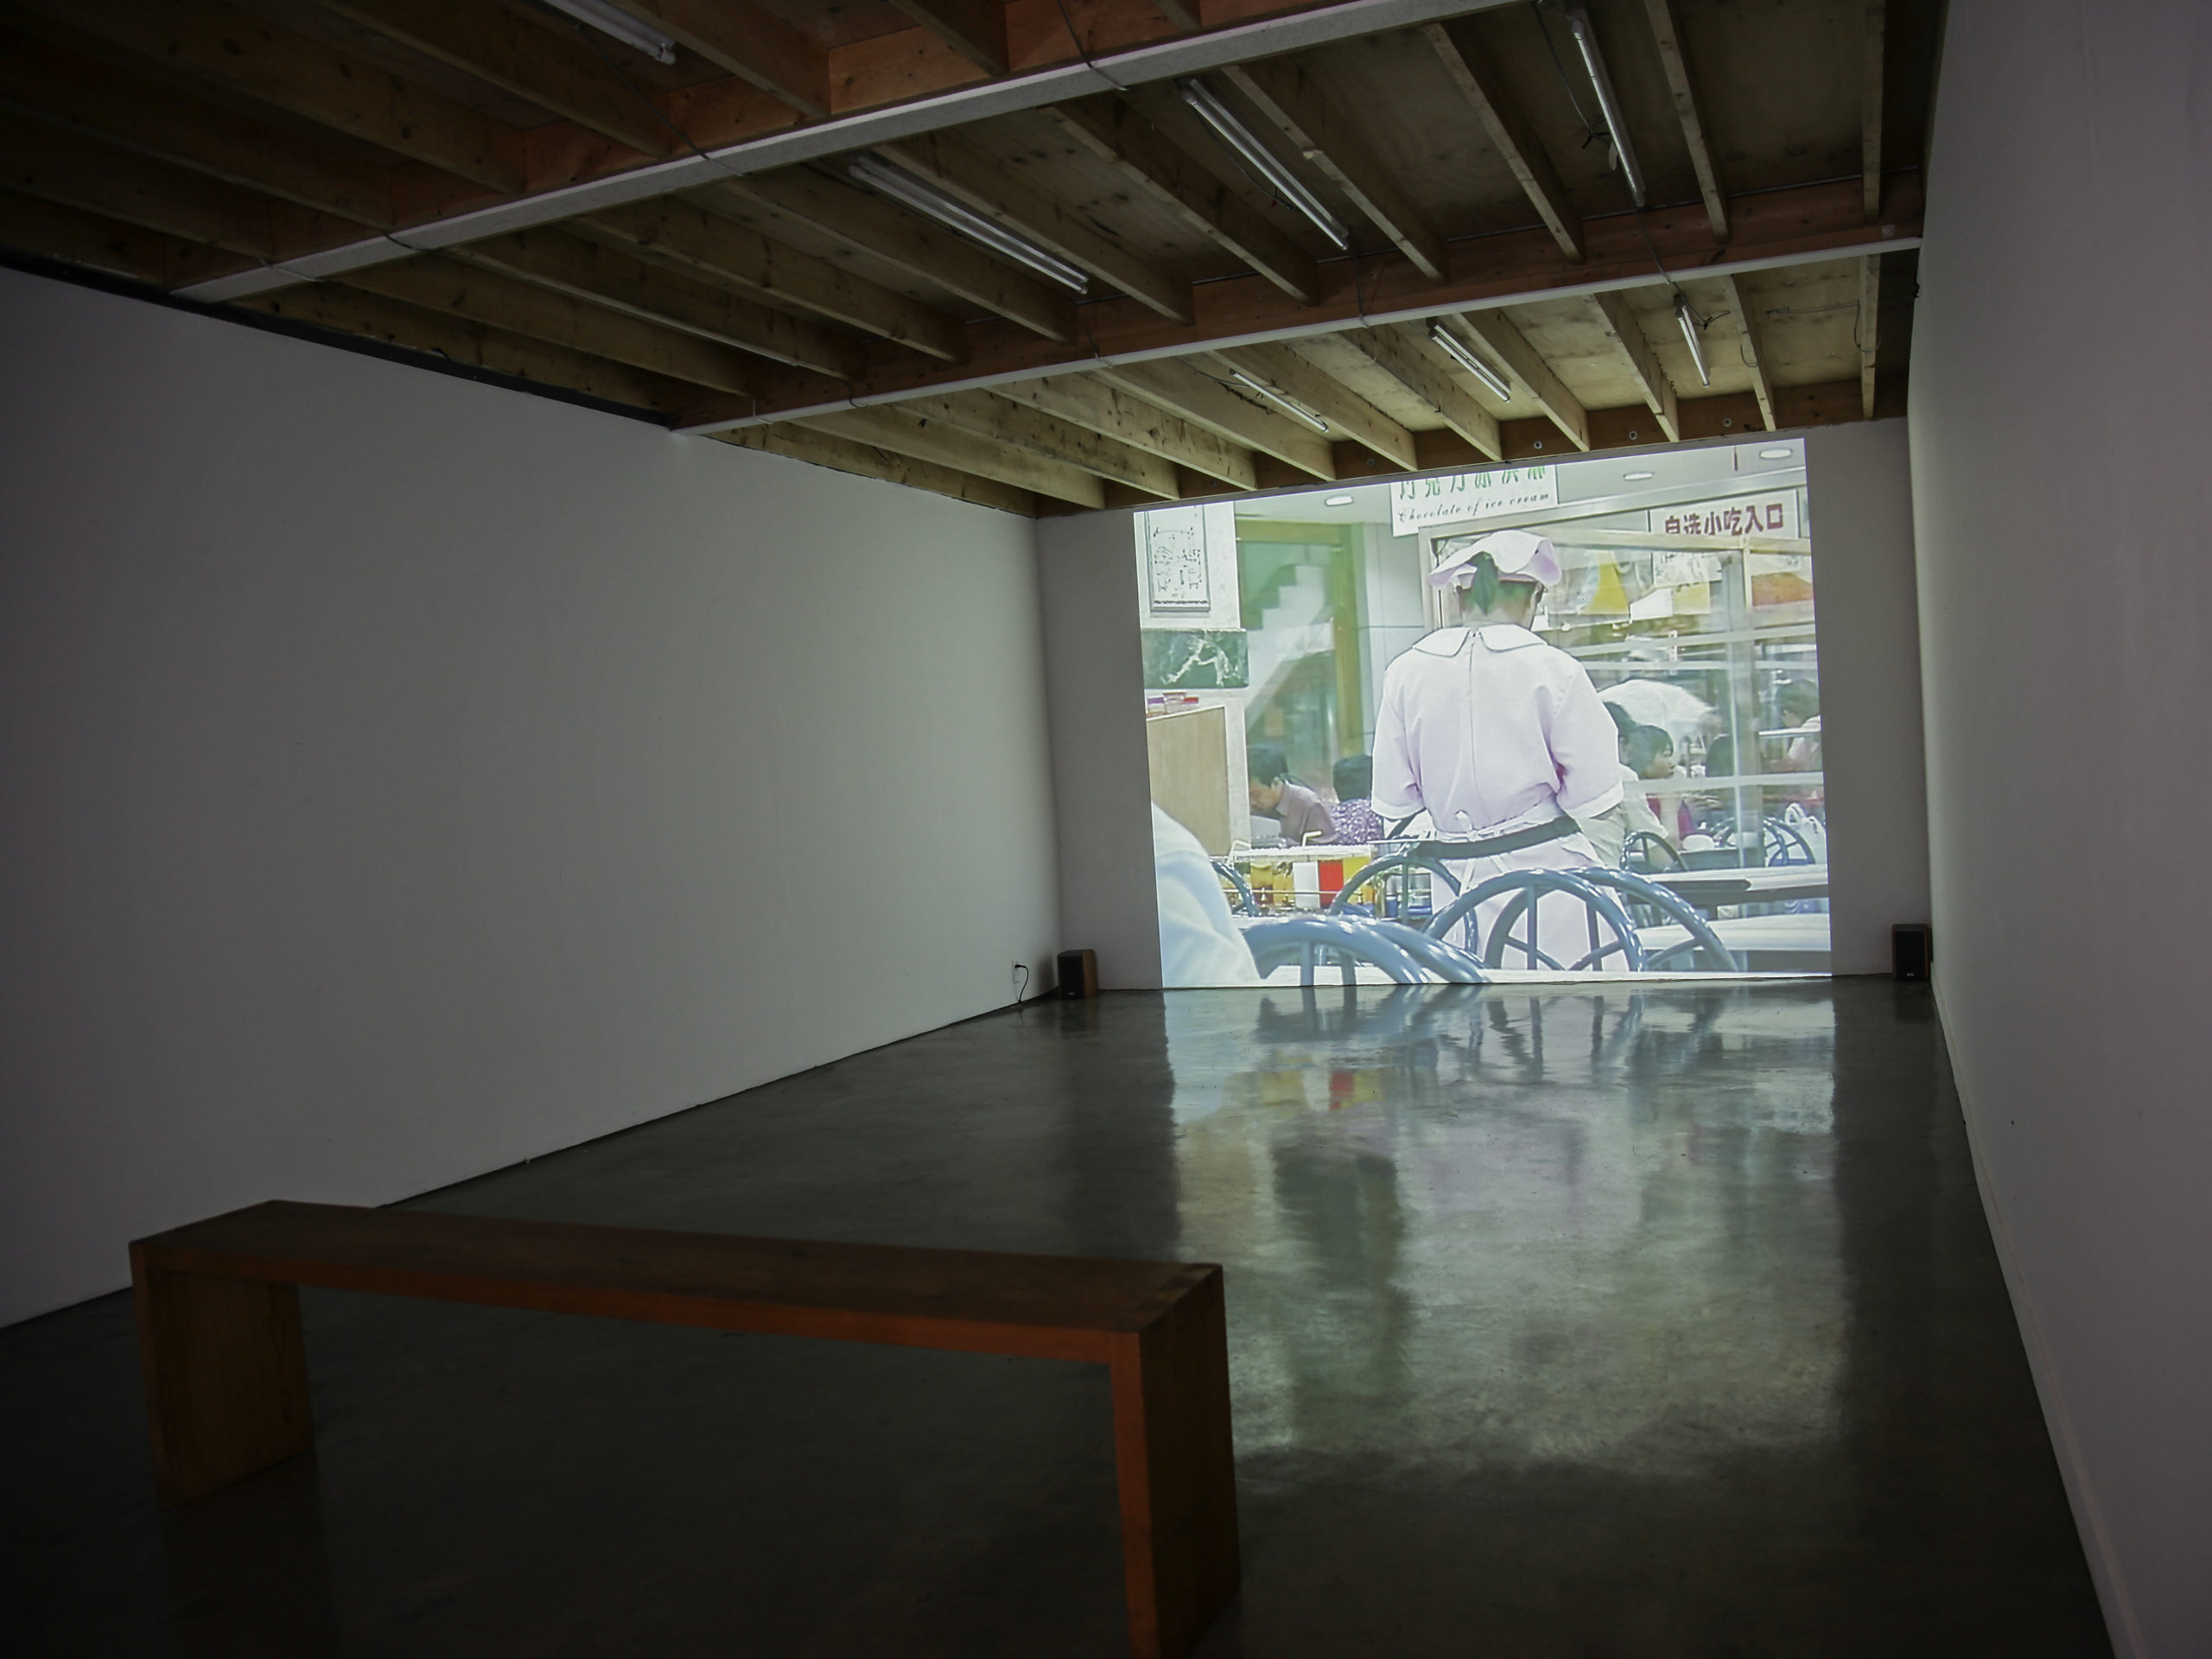 Clemens von Wedemeyer and Maya Schweizer – Metropolis – Report from China, 2004-2006, 42min, installation view, Total Museum of Contemporary Art, Seoul, South Korea